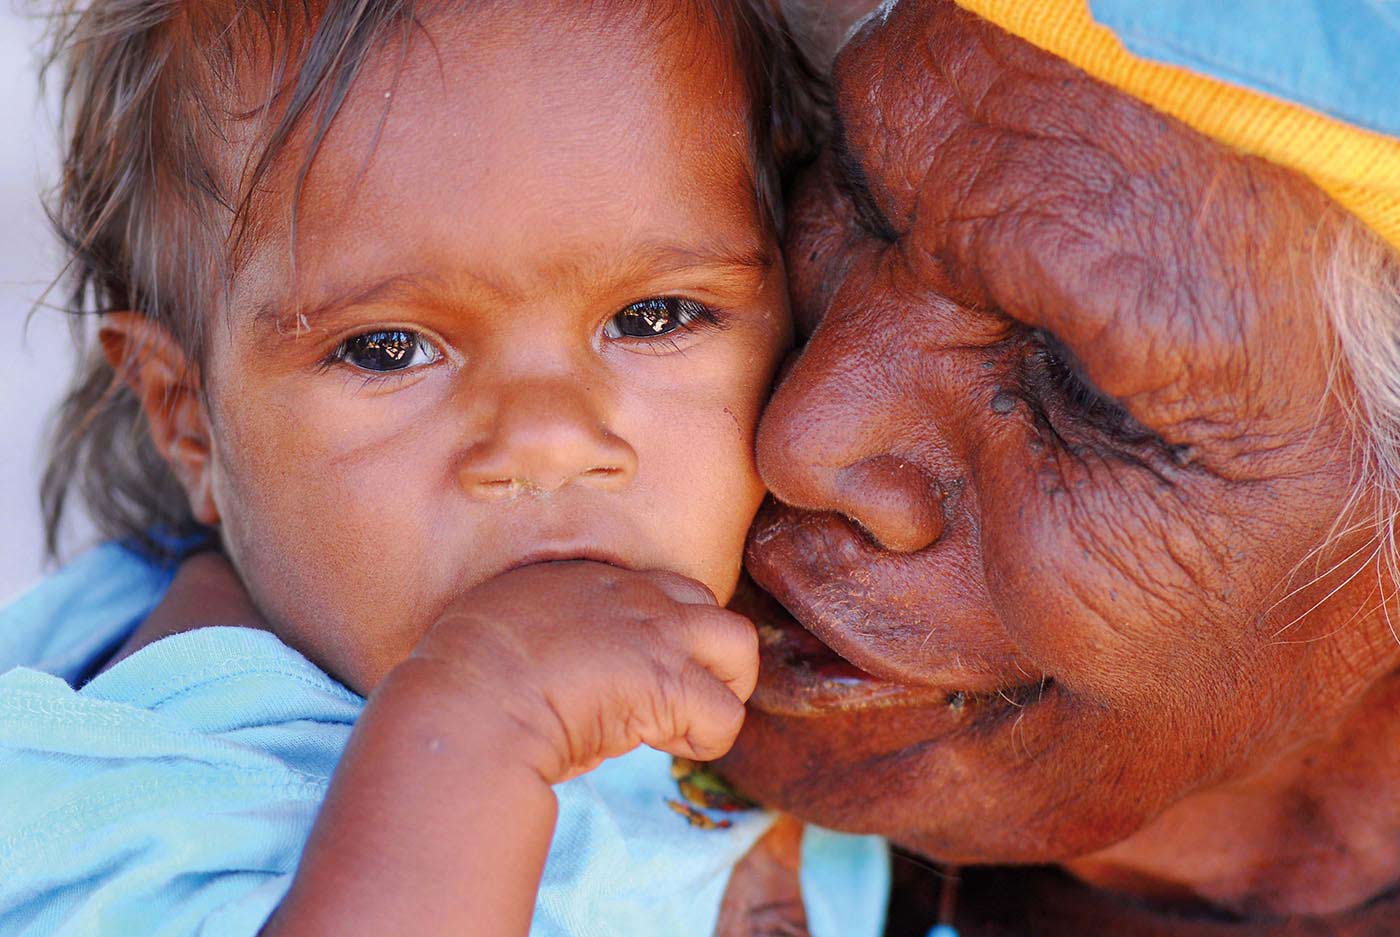 Colour photograph of a close-up shot of an elderly woman affectionately pressing her cheek to a young child's.